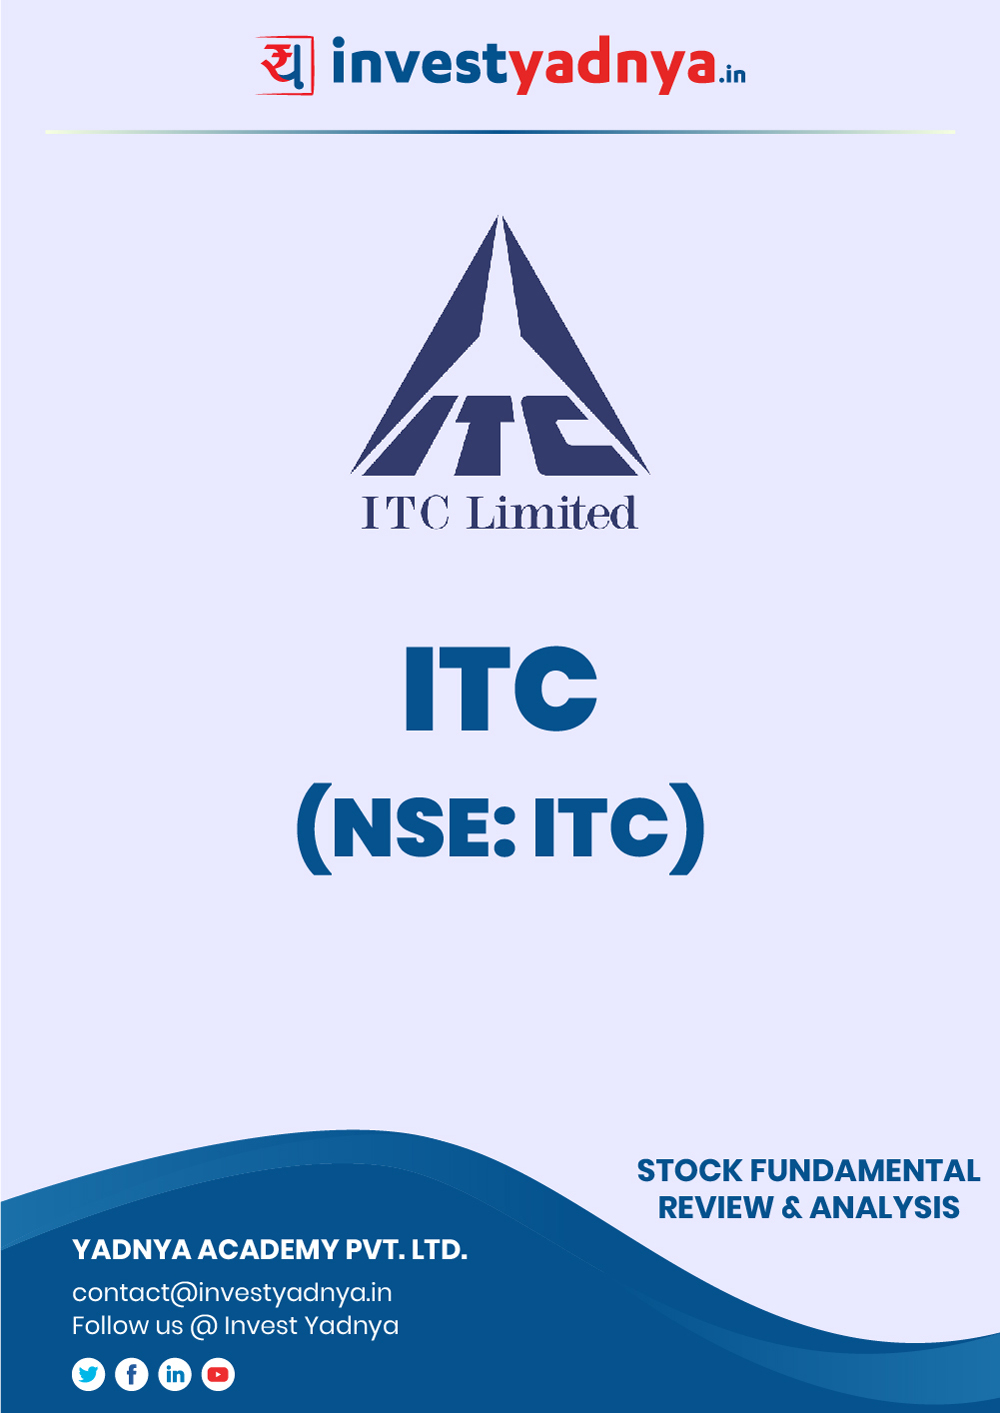 This e-book contains in-depth fundamental analysis of ITC considering both Financial and Equity Research Parameters. It reviews the company, industry competitors, shareholding pattern, financials, and annual performance. ✔ Detailed Research ✔ Quality Reports